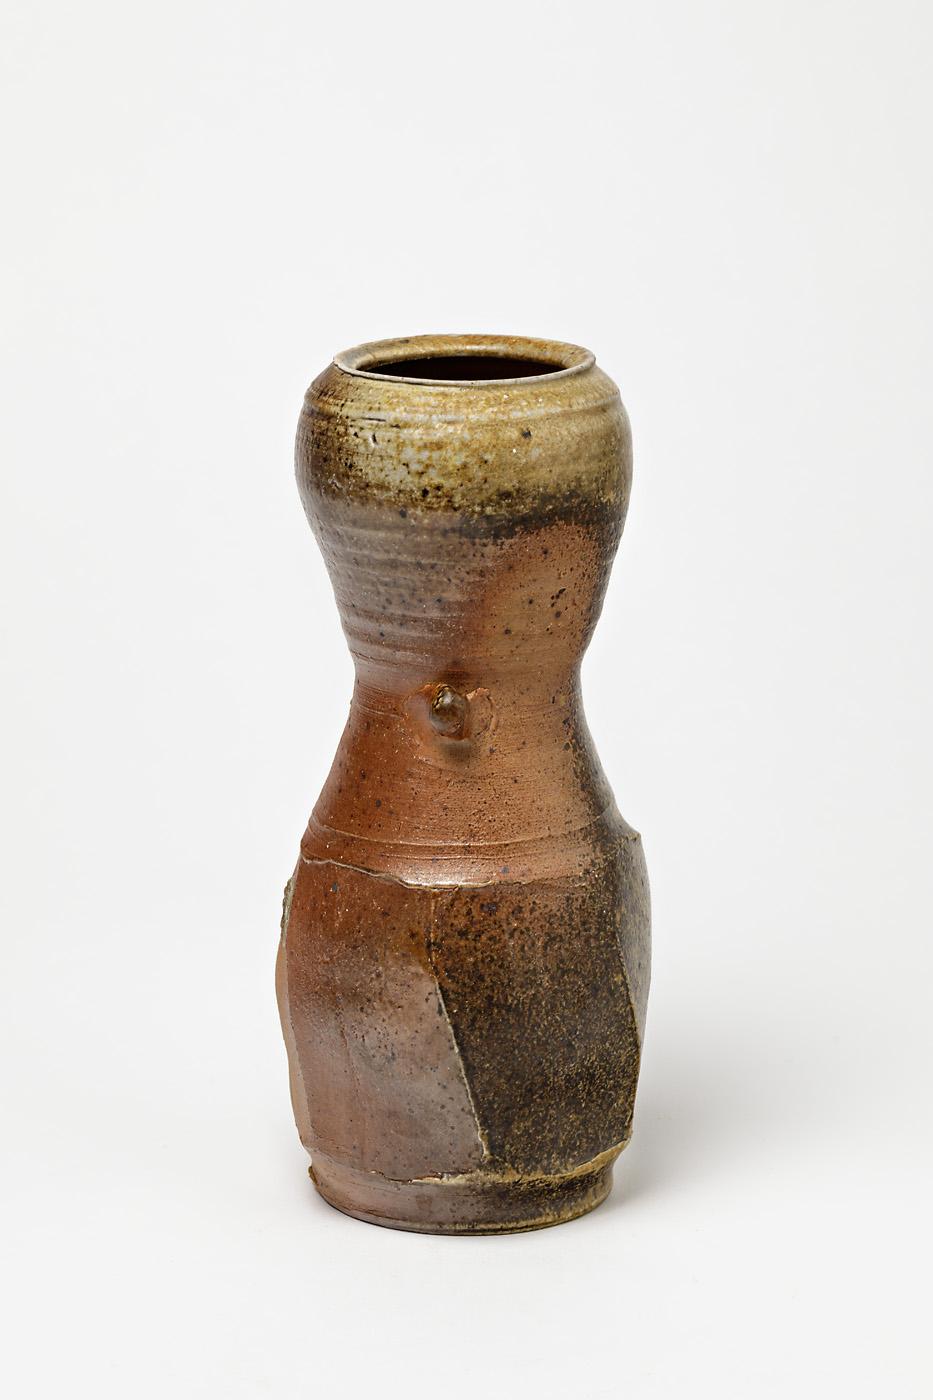 20th Century Decorative brown Ceramic Vase by Steen Kepp Danish Artist Pottery For Sale